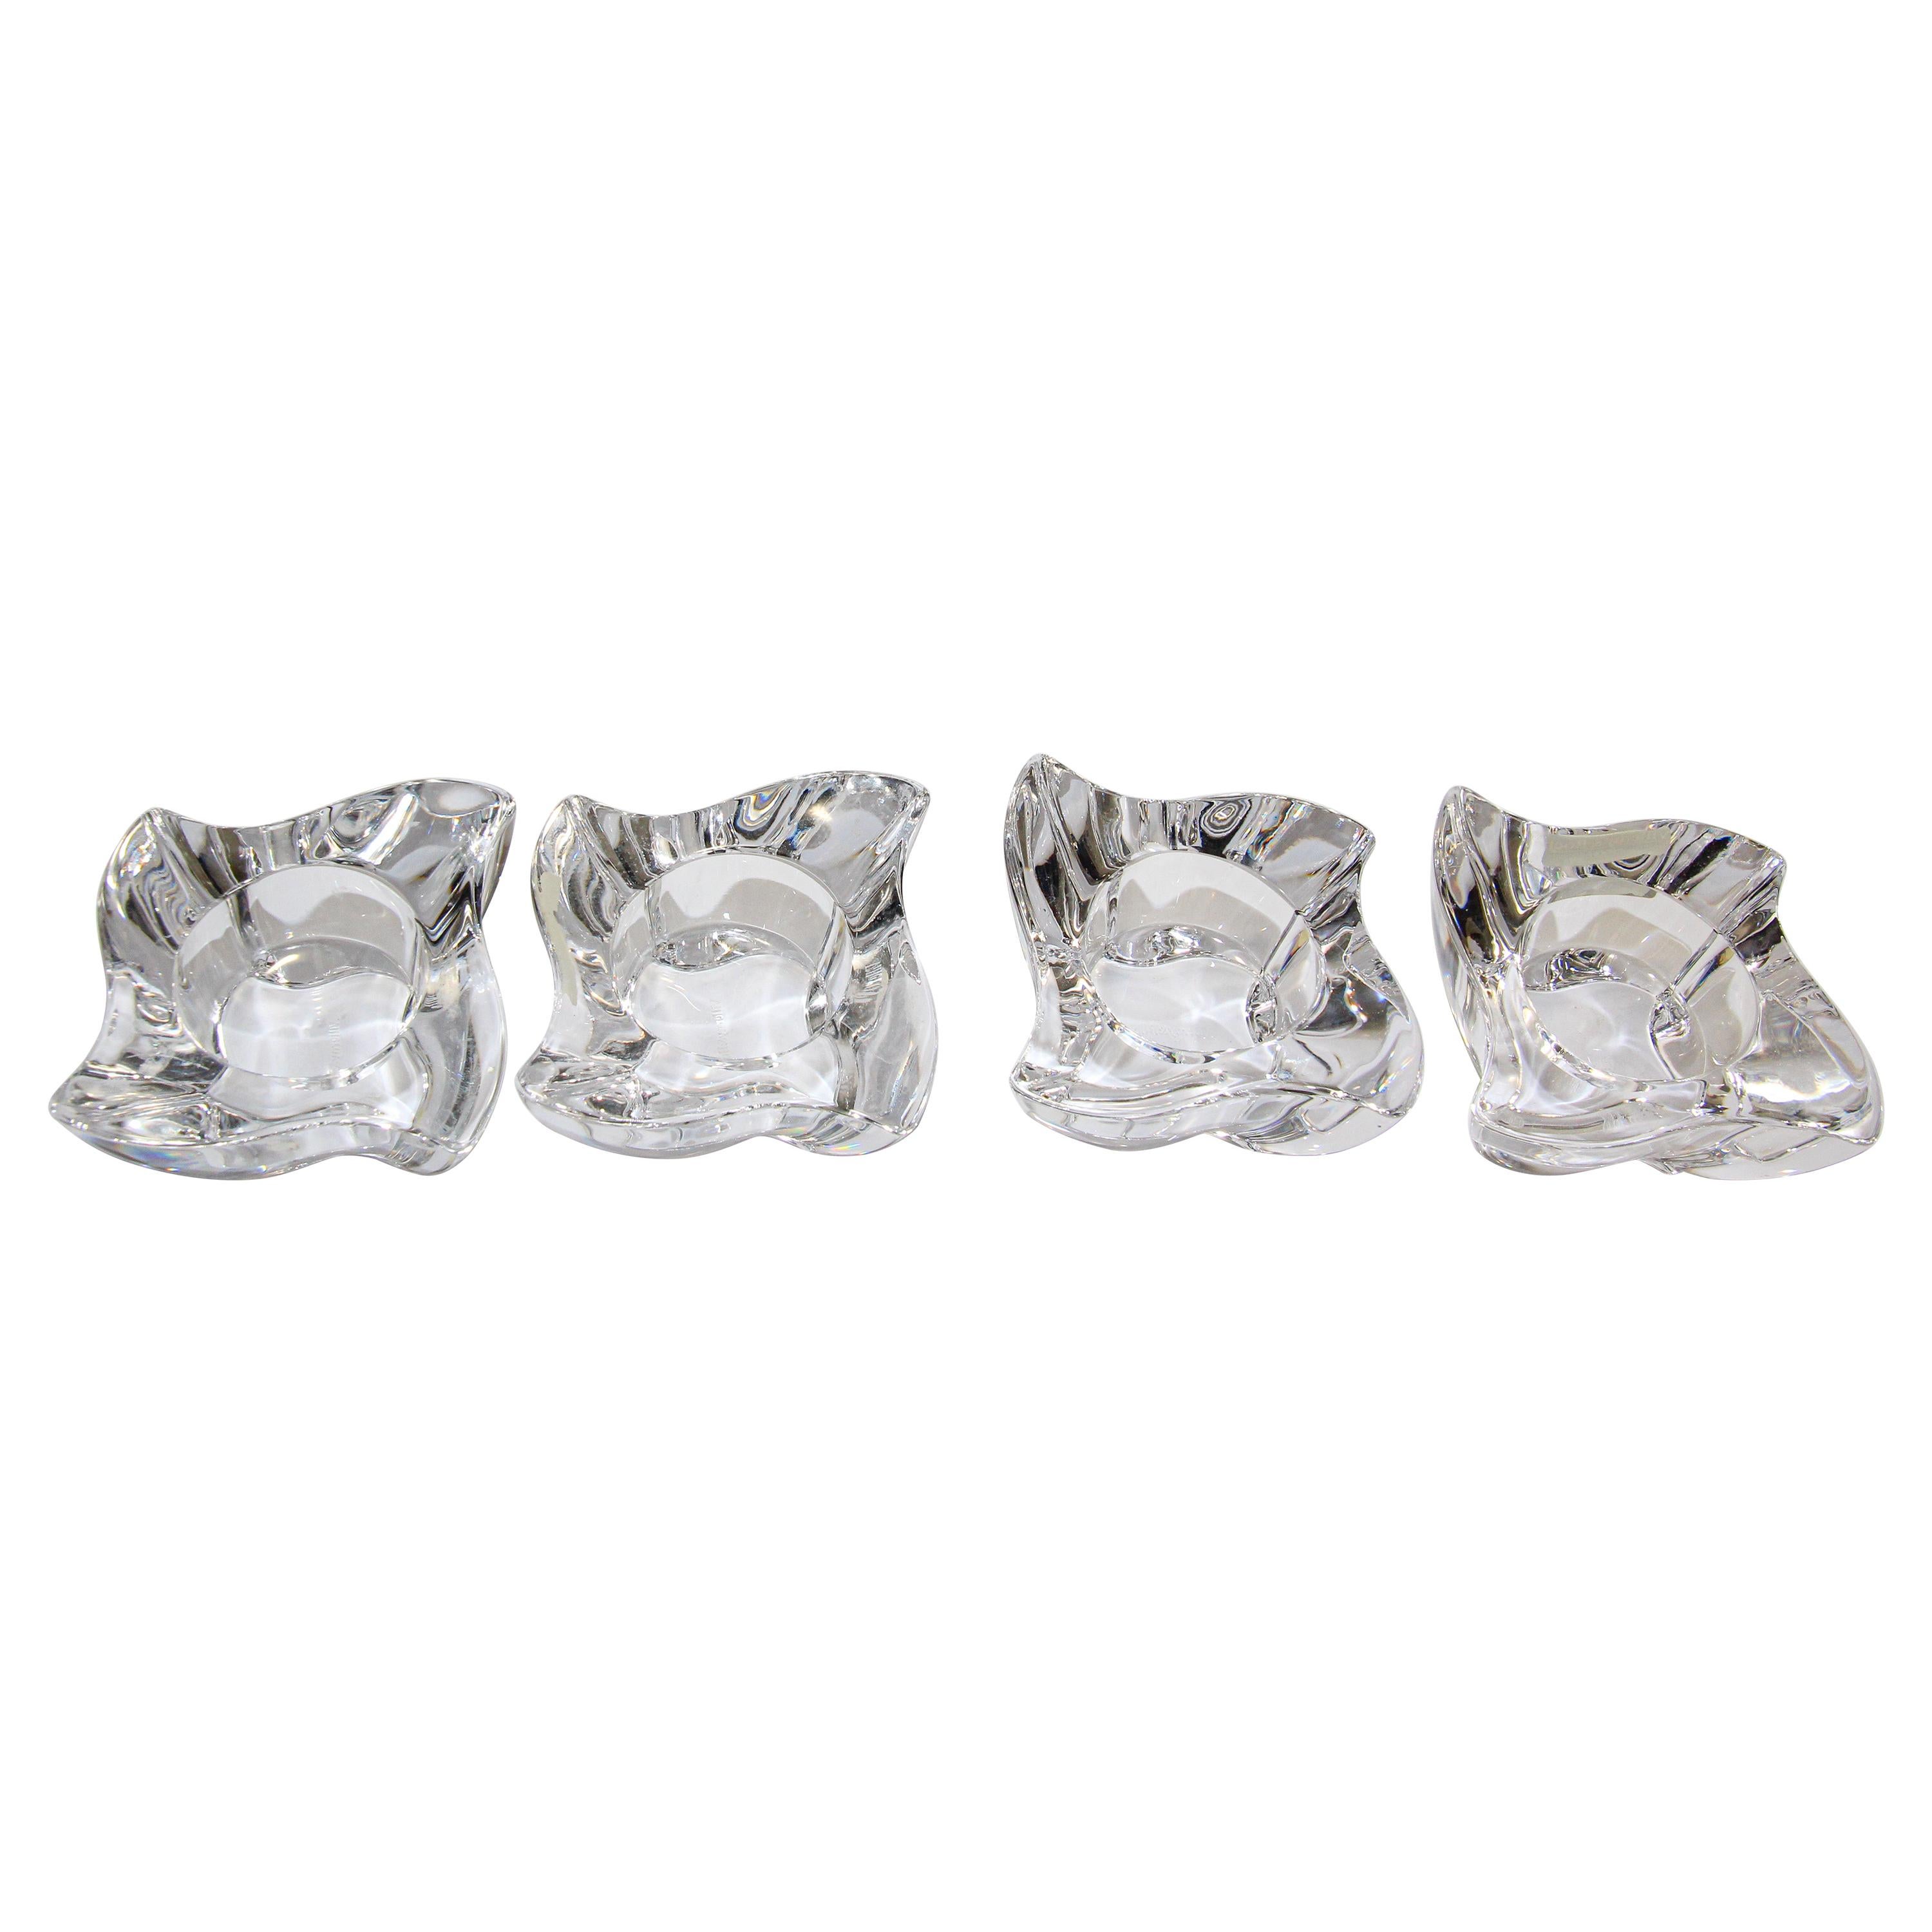 Villeroy and Boch Crystal Votive Candle Holders Set of 4